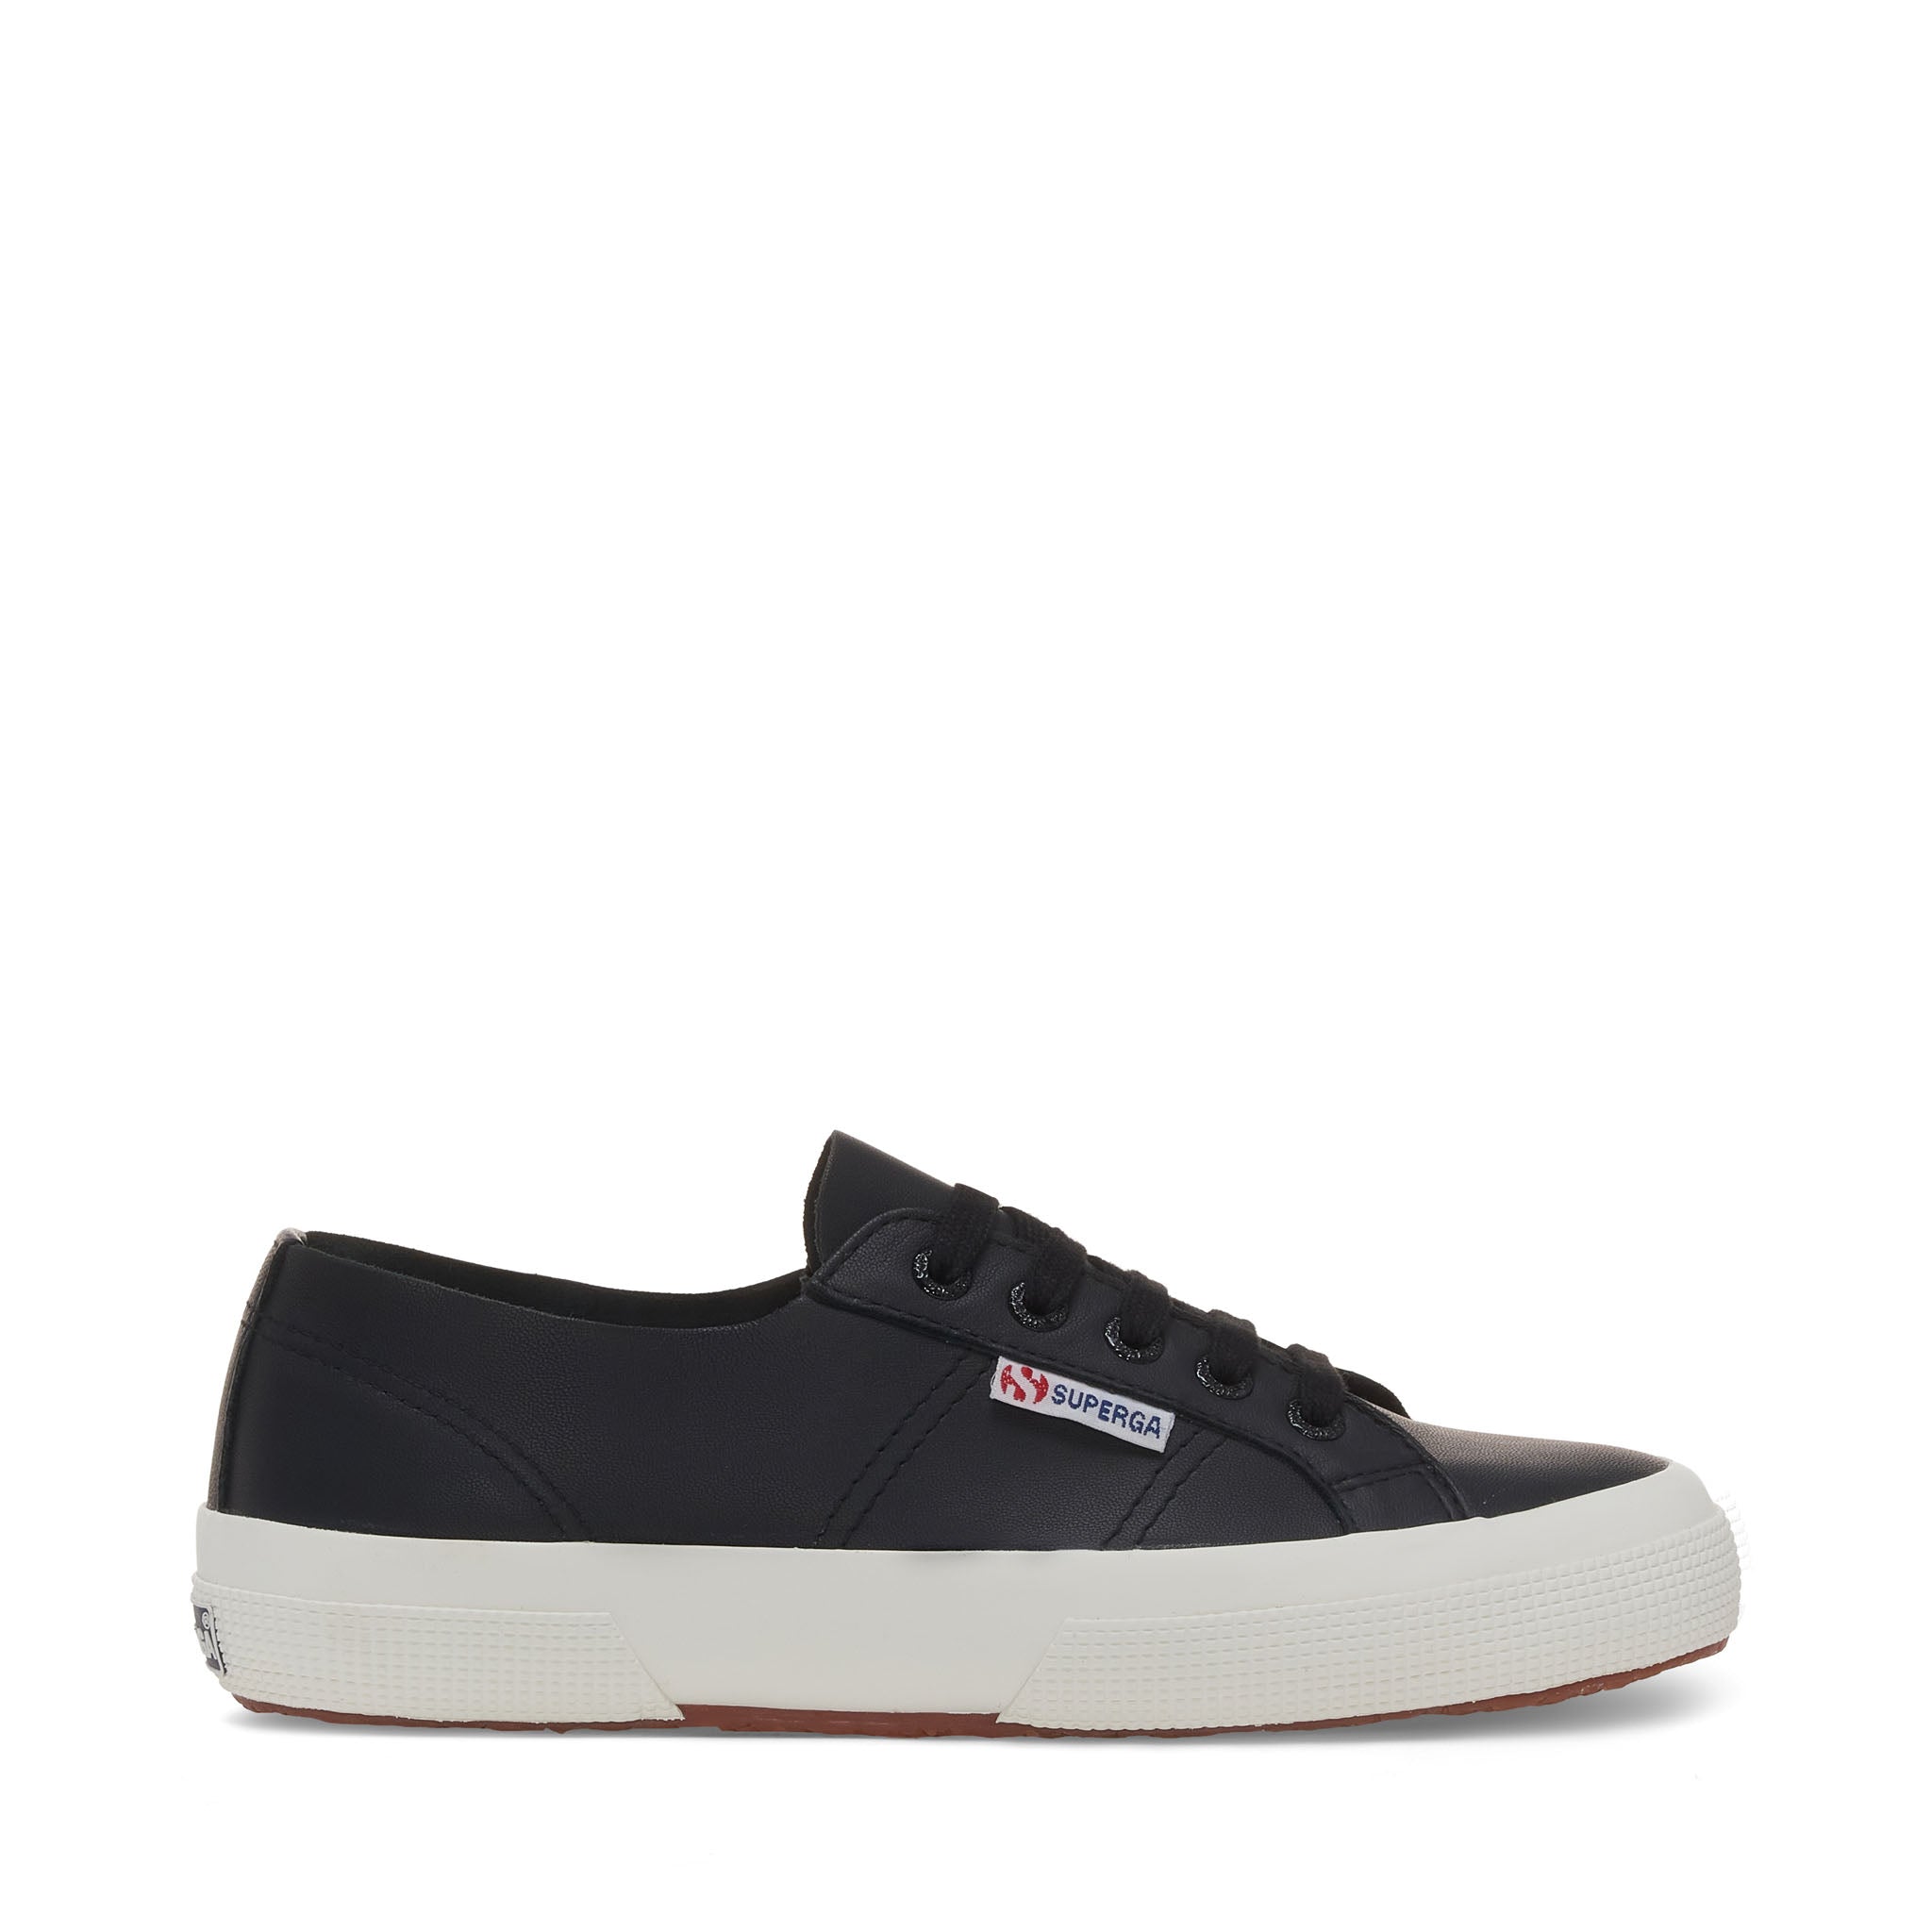 Superga 2750 Unlined Nappa Sneakers - Black. Side view.